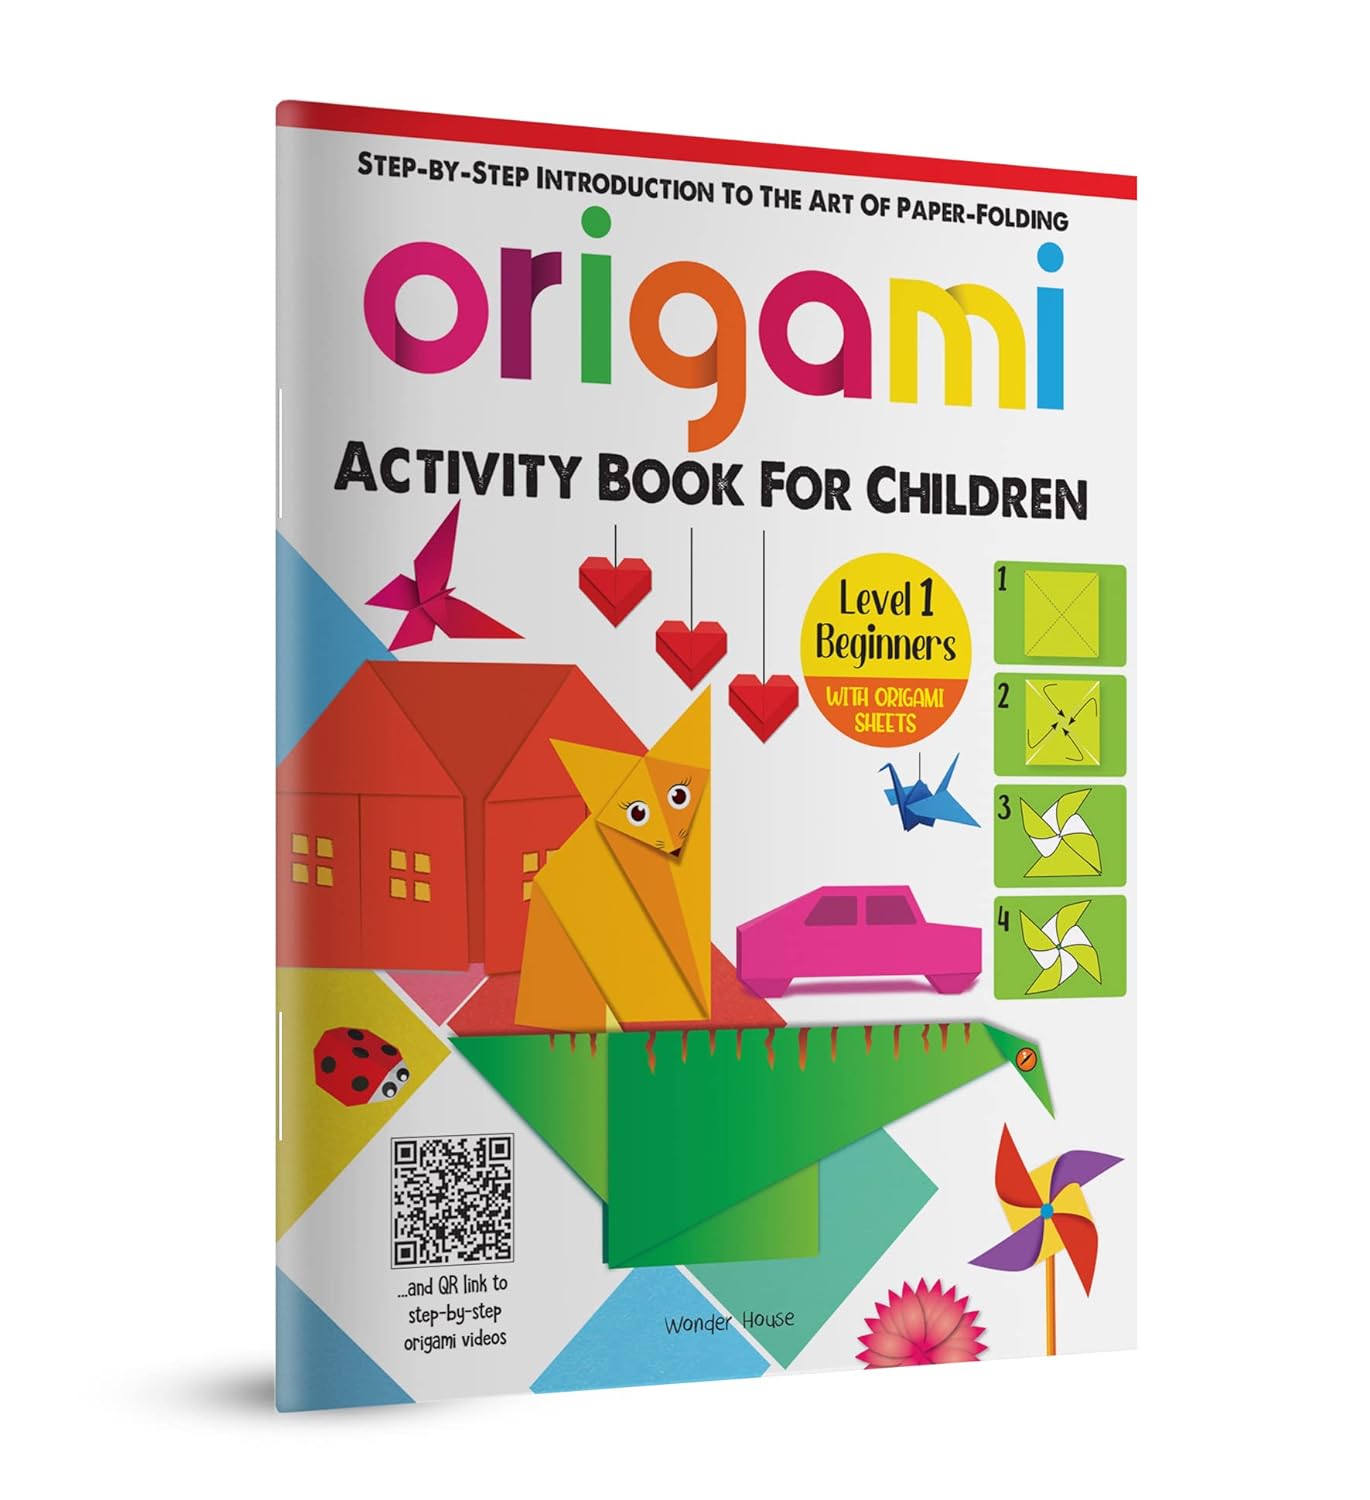 Origami - The Art of Paper-Folding - Activity Book For Children Level -1